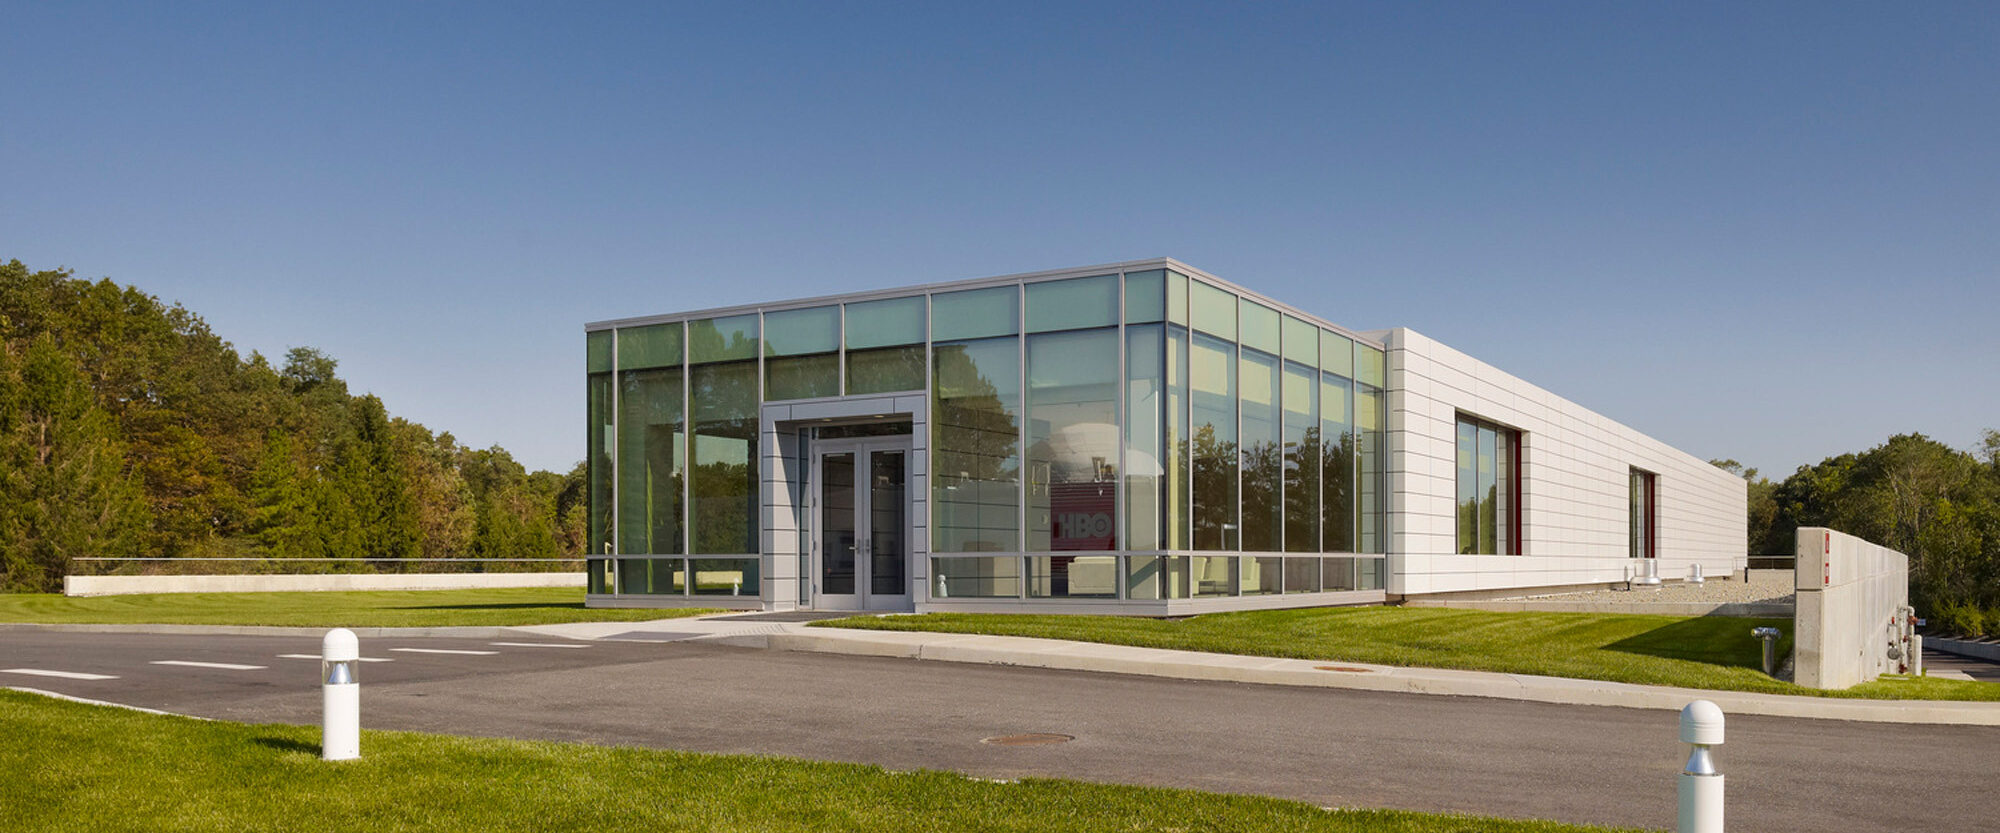 Modern glass-fronted building with clean lines and minimalist design, set against a clear blue sky and situated in a landscaped environment with green lawns and sparse trees. The structure features a flat roof and expansive windows allowing ample natural light.